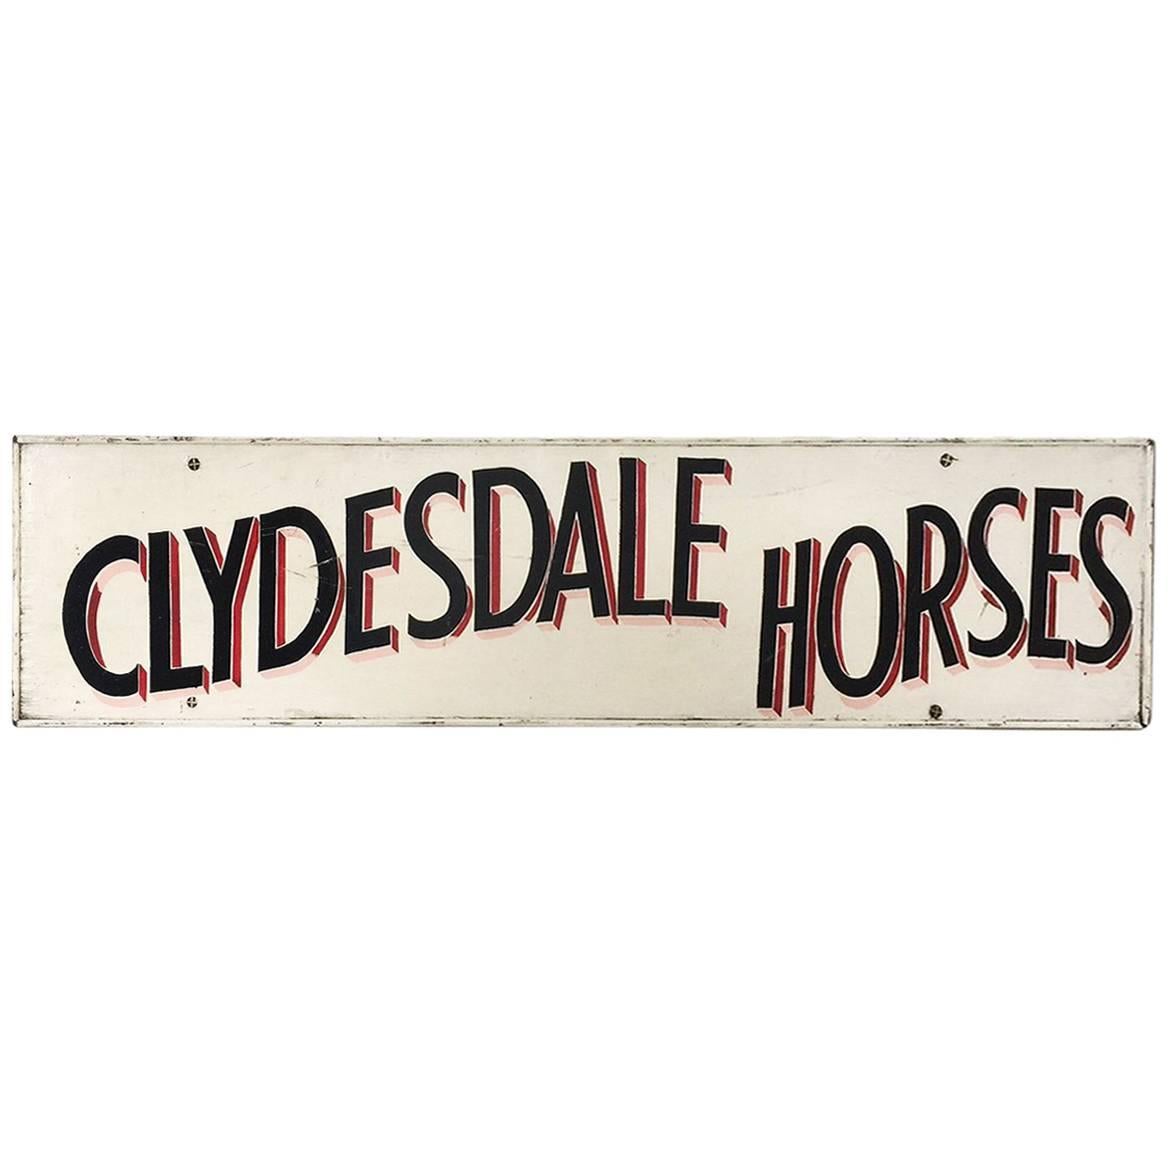 Vintage Folk Art Country Horse Fair Carnival Hand-Painted Clydesdale Horses Sign For Sale